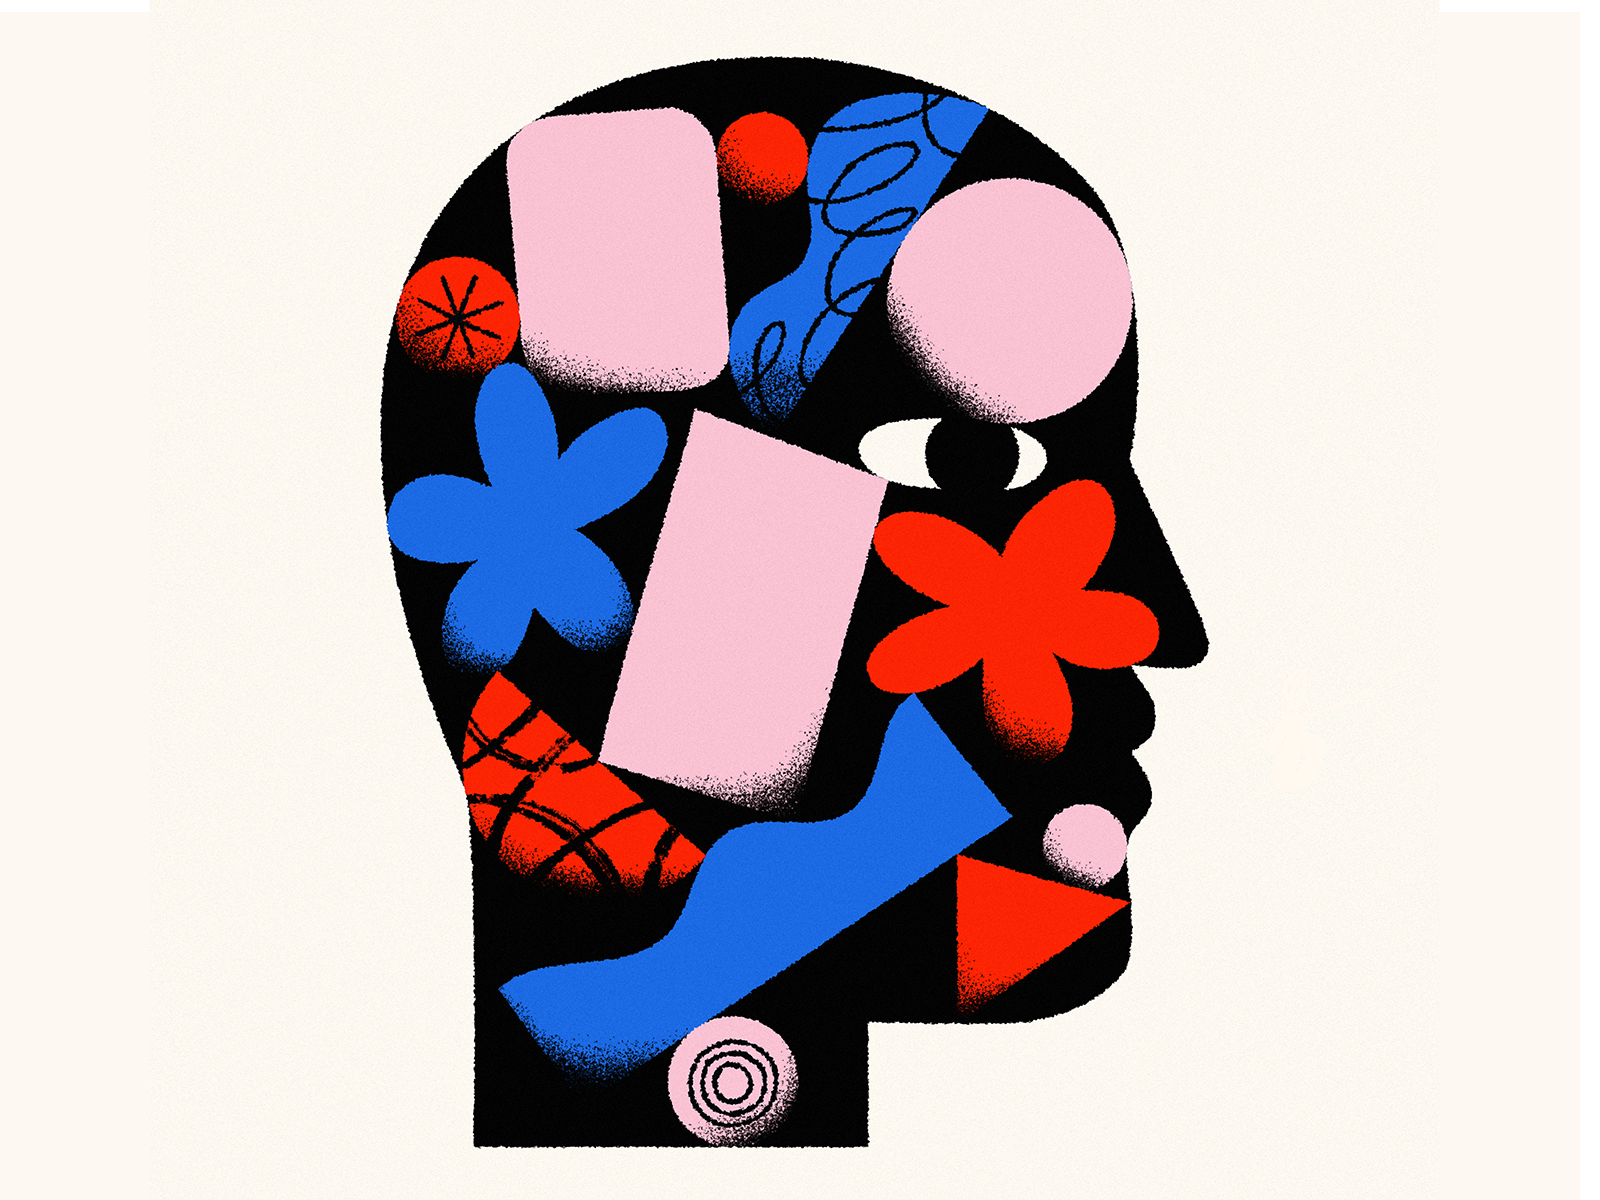 Living in my head abstract abstraction brain brushes circles geometric geometry head human man mental health minimal pattern person portrait shapes square texture thoughts triangle